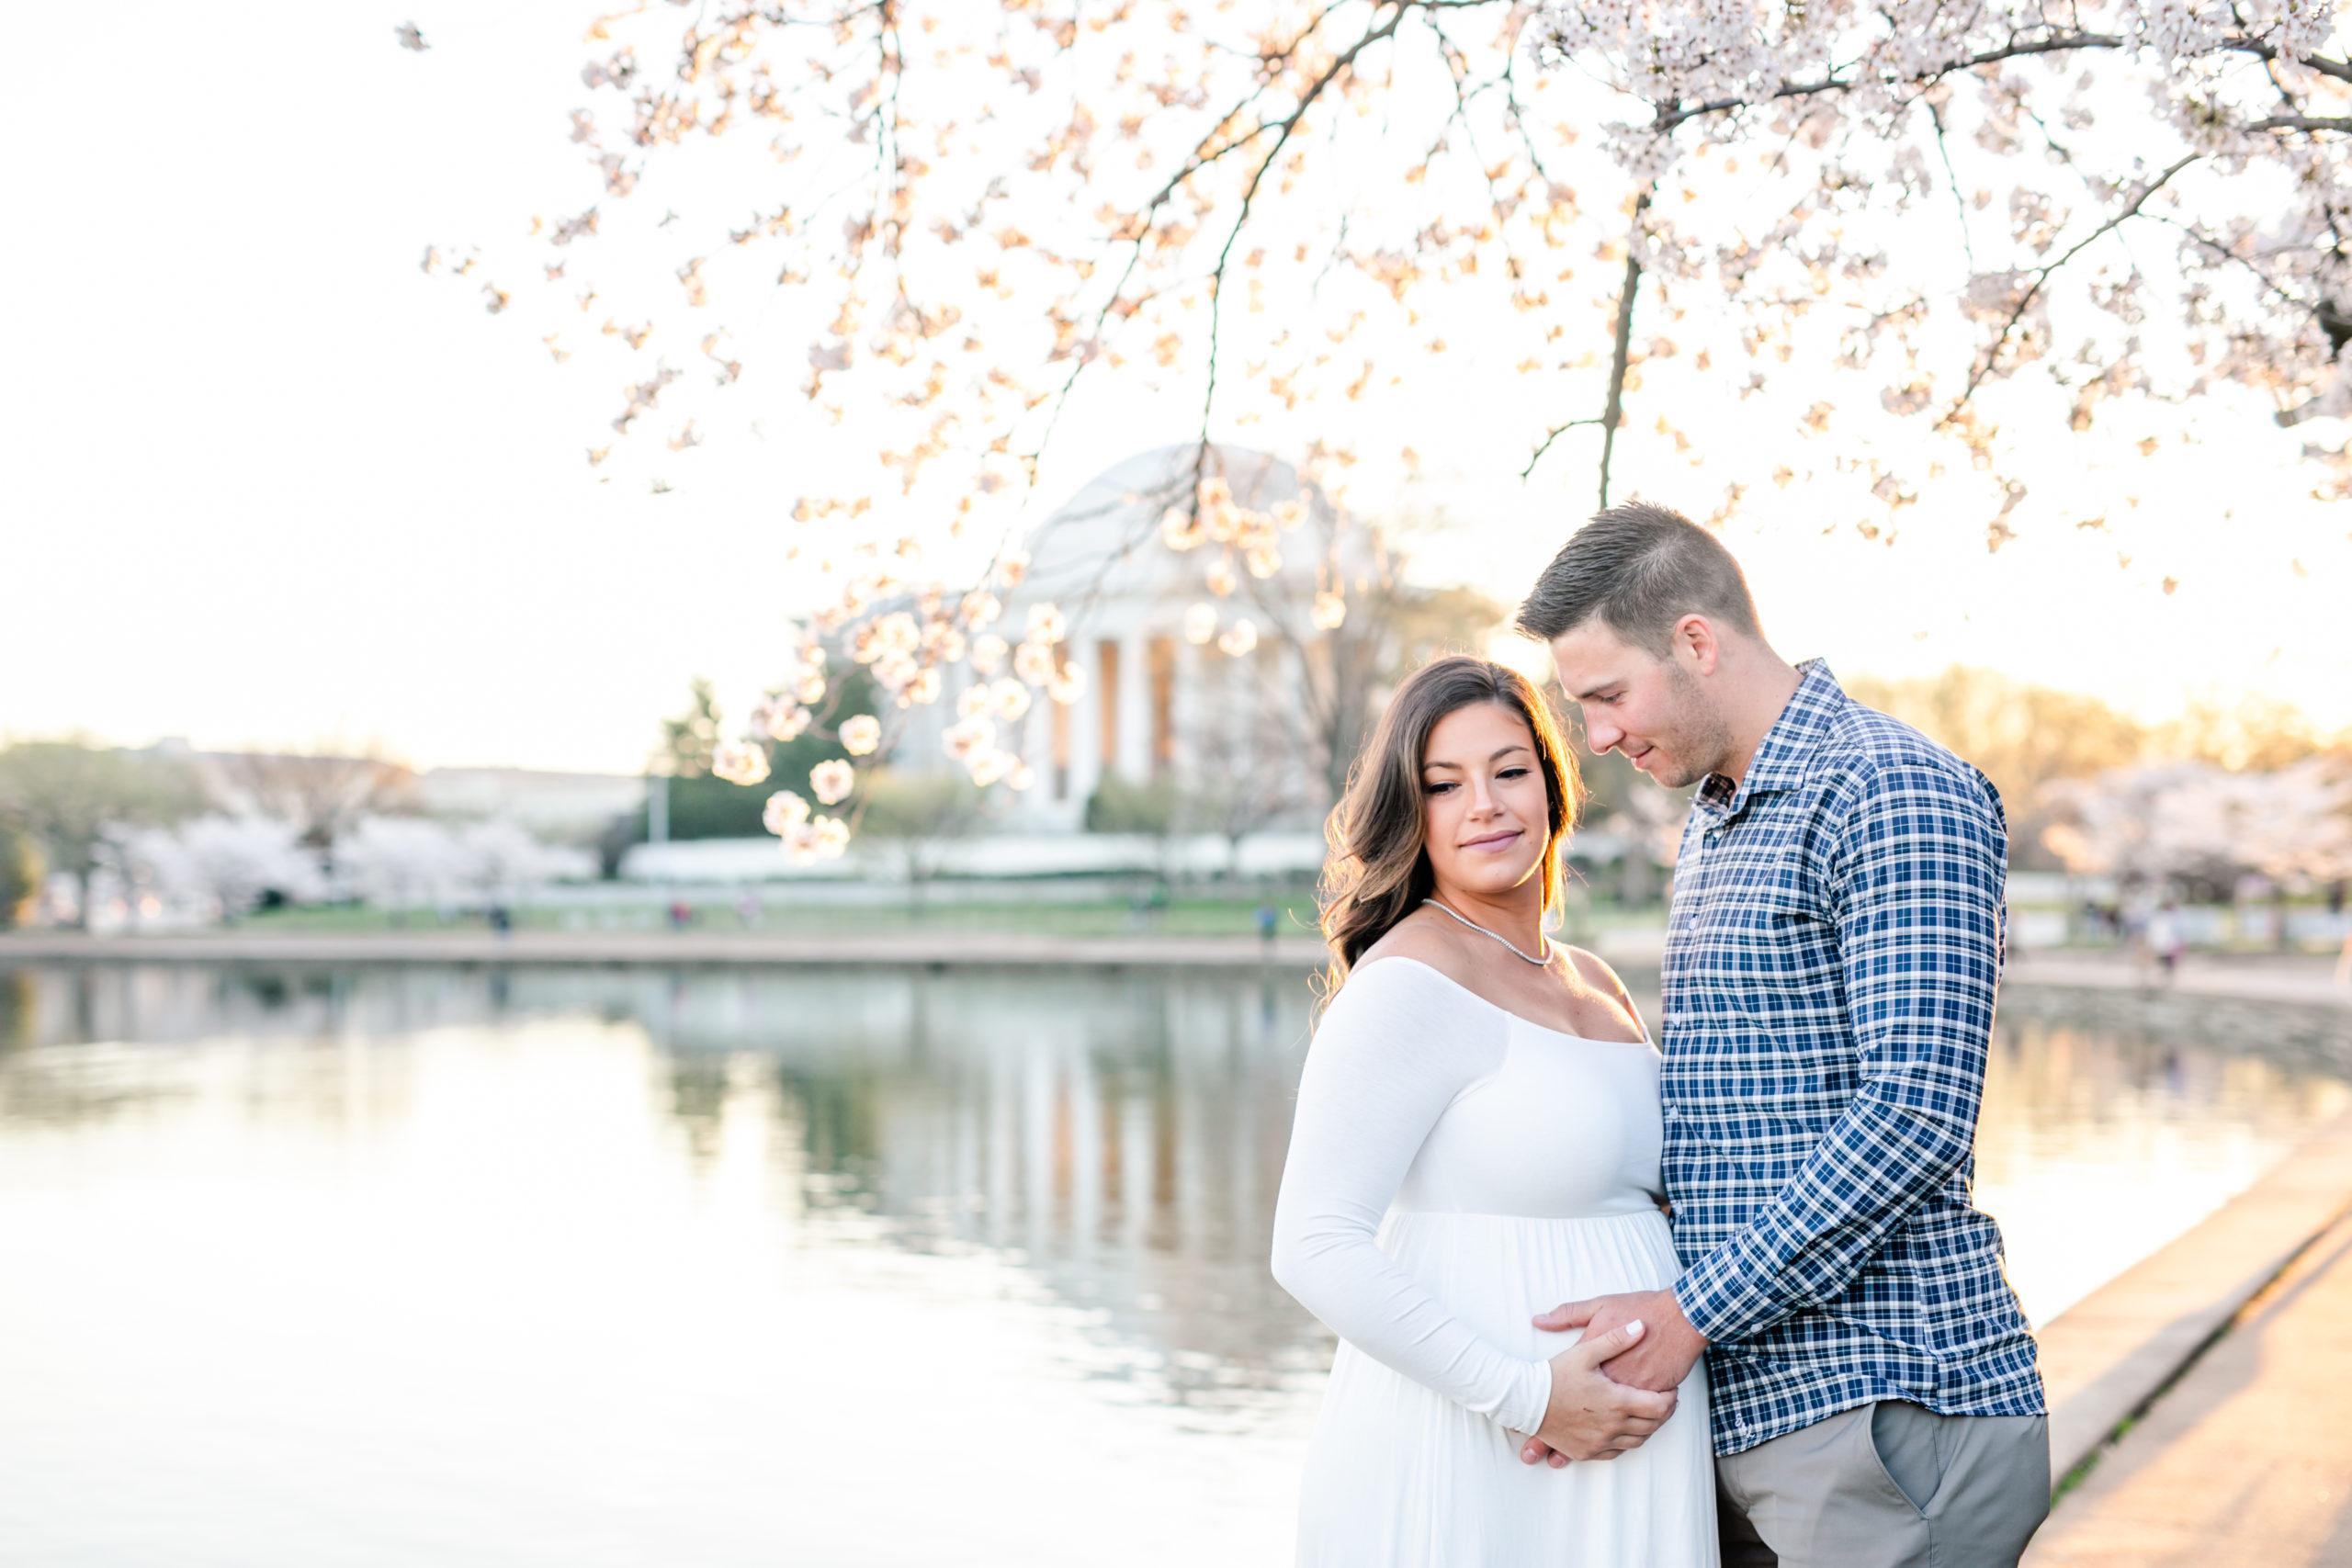 how to prepare for cherry blossoms photos, tips for cherry blossoms season, DC cherry blossoms photography, DC cherry blossoms photographer, photo session tips, cherry blossoms photos tips, DC cherry blossoms, Rachel E.H. Photography, cherry blossoms maternity photos